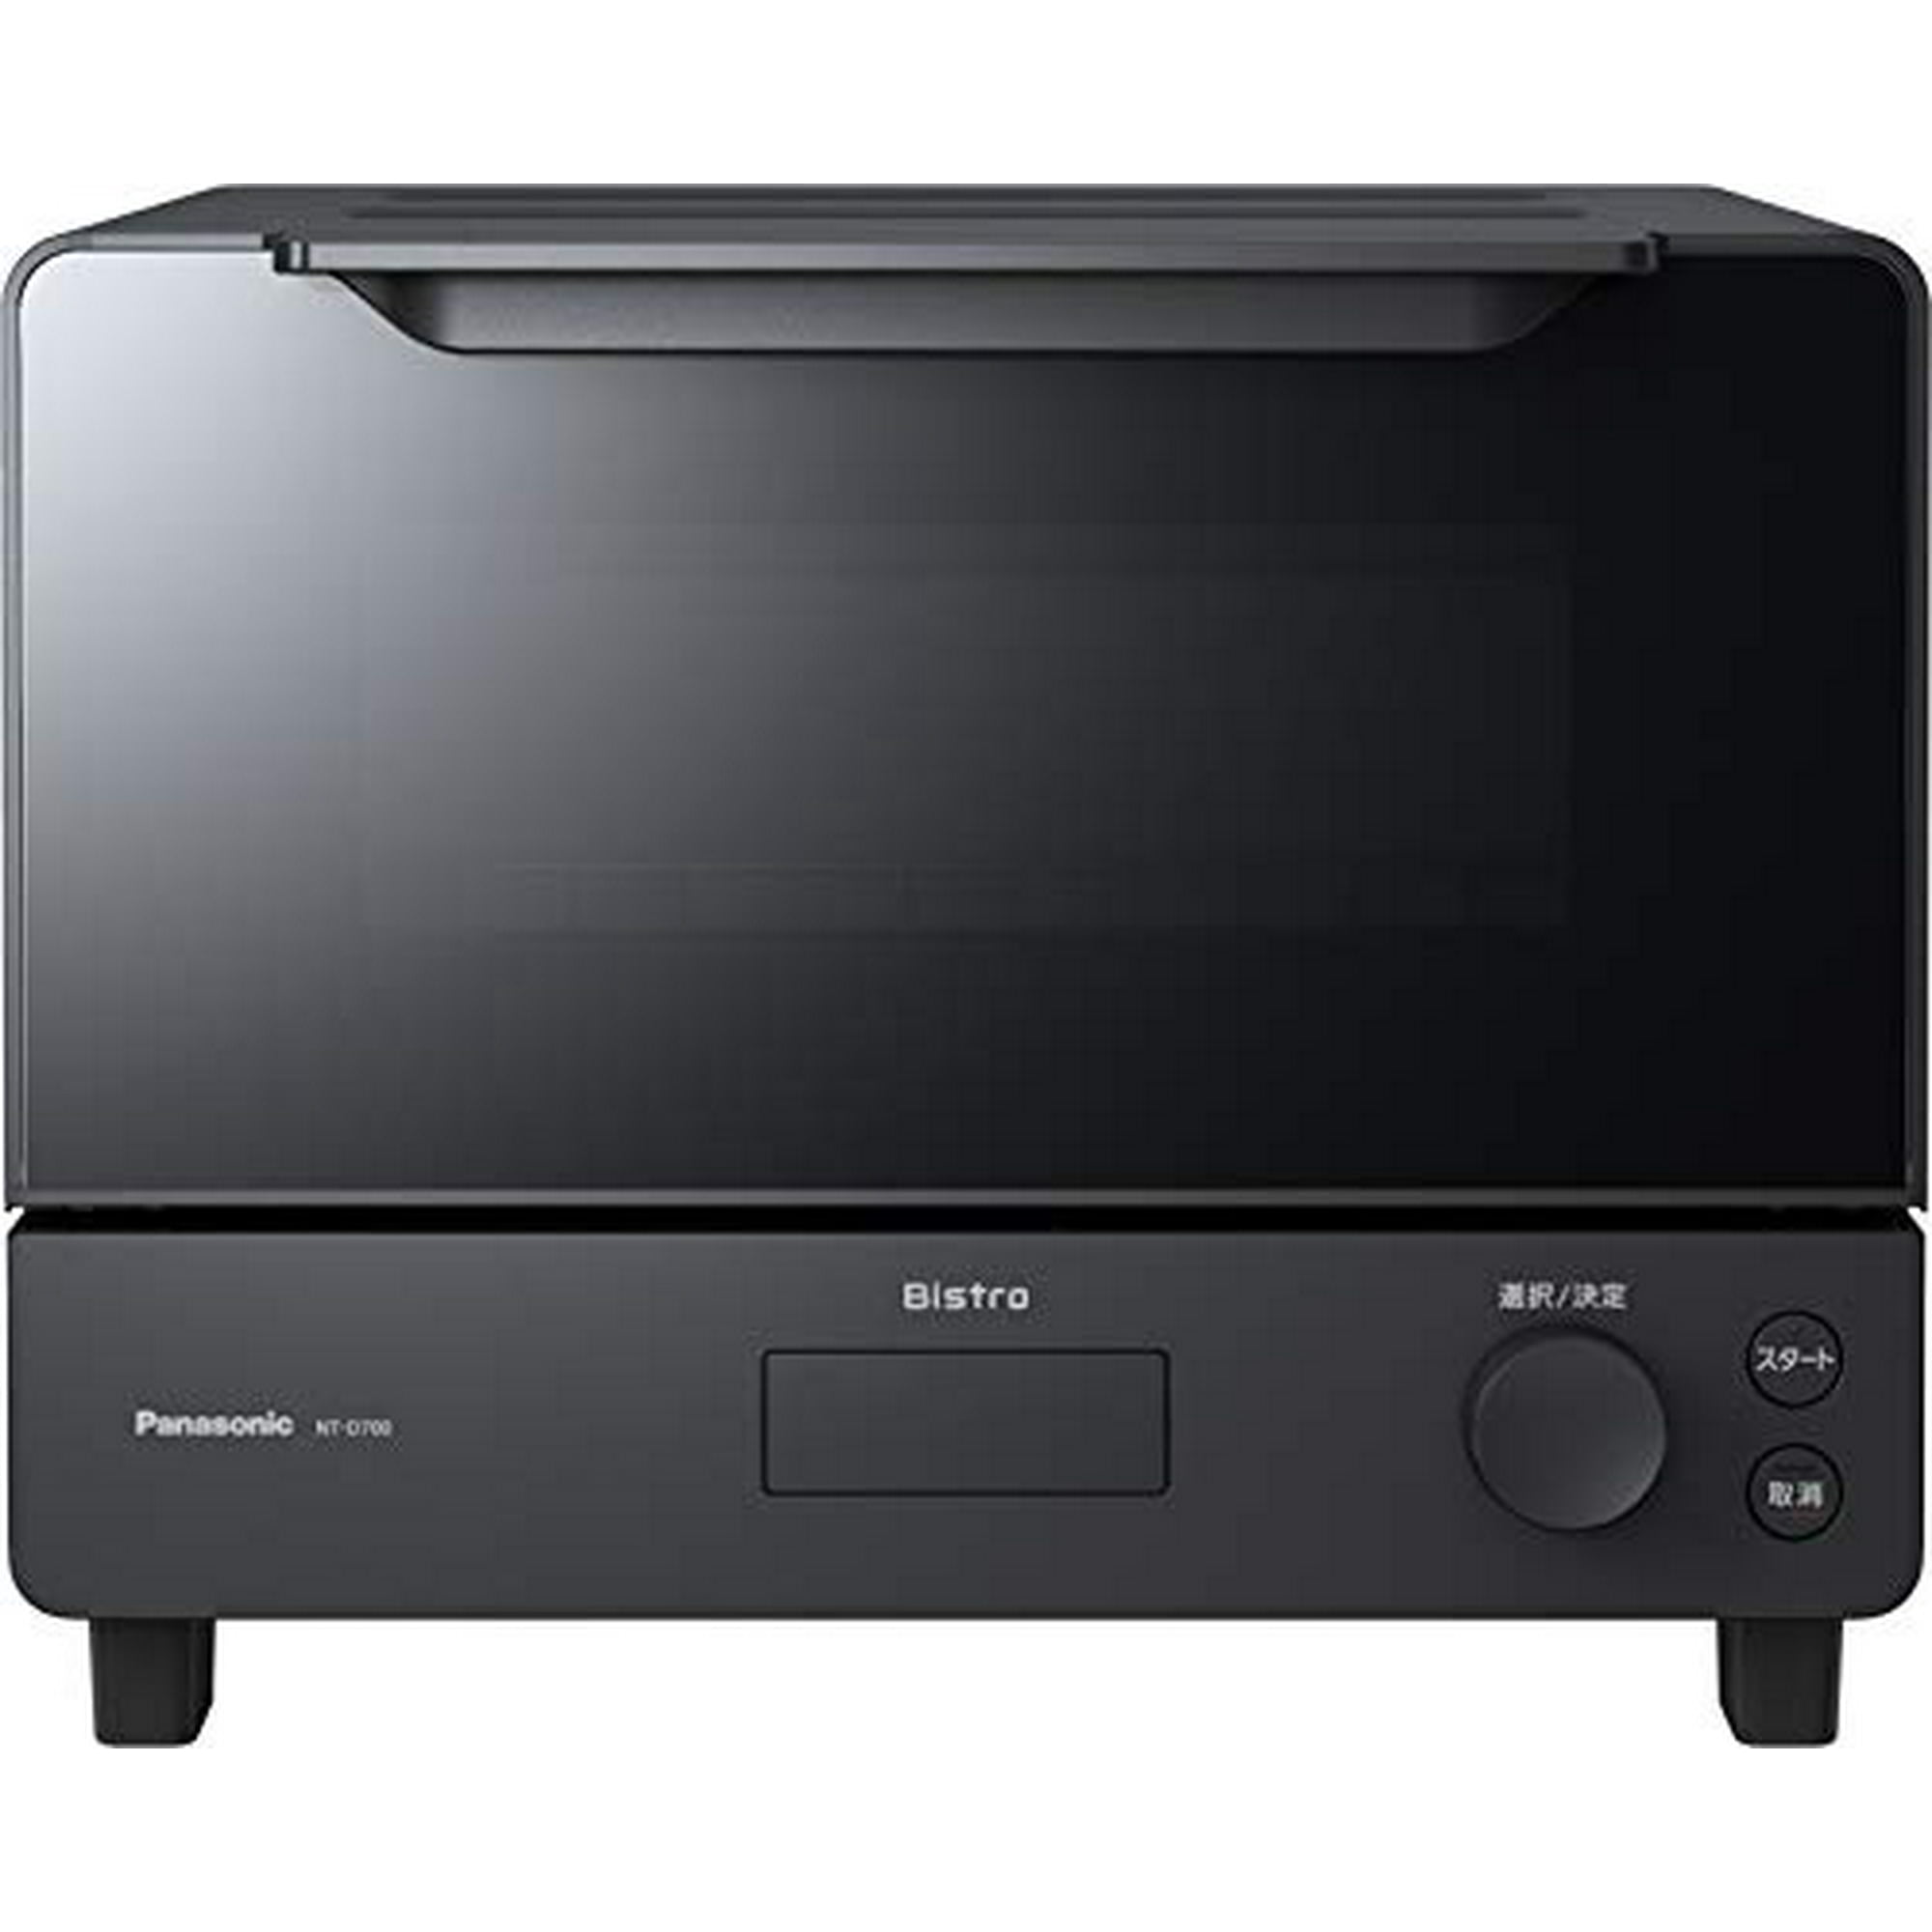 Panasonic Oven Toaster Bistro 8-stage temperature control Oven